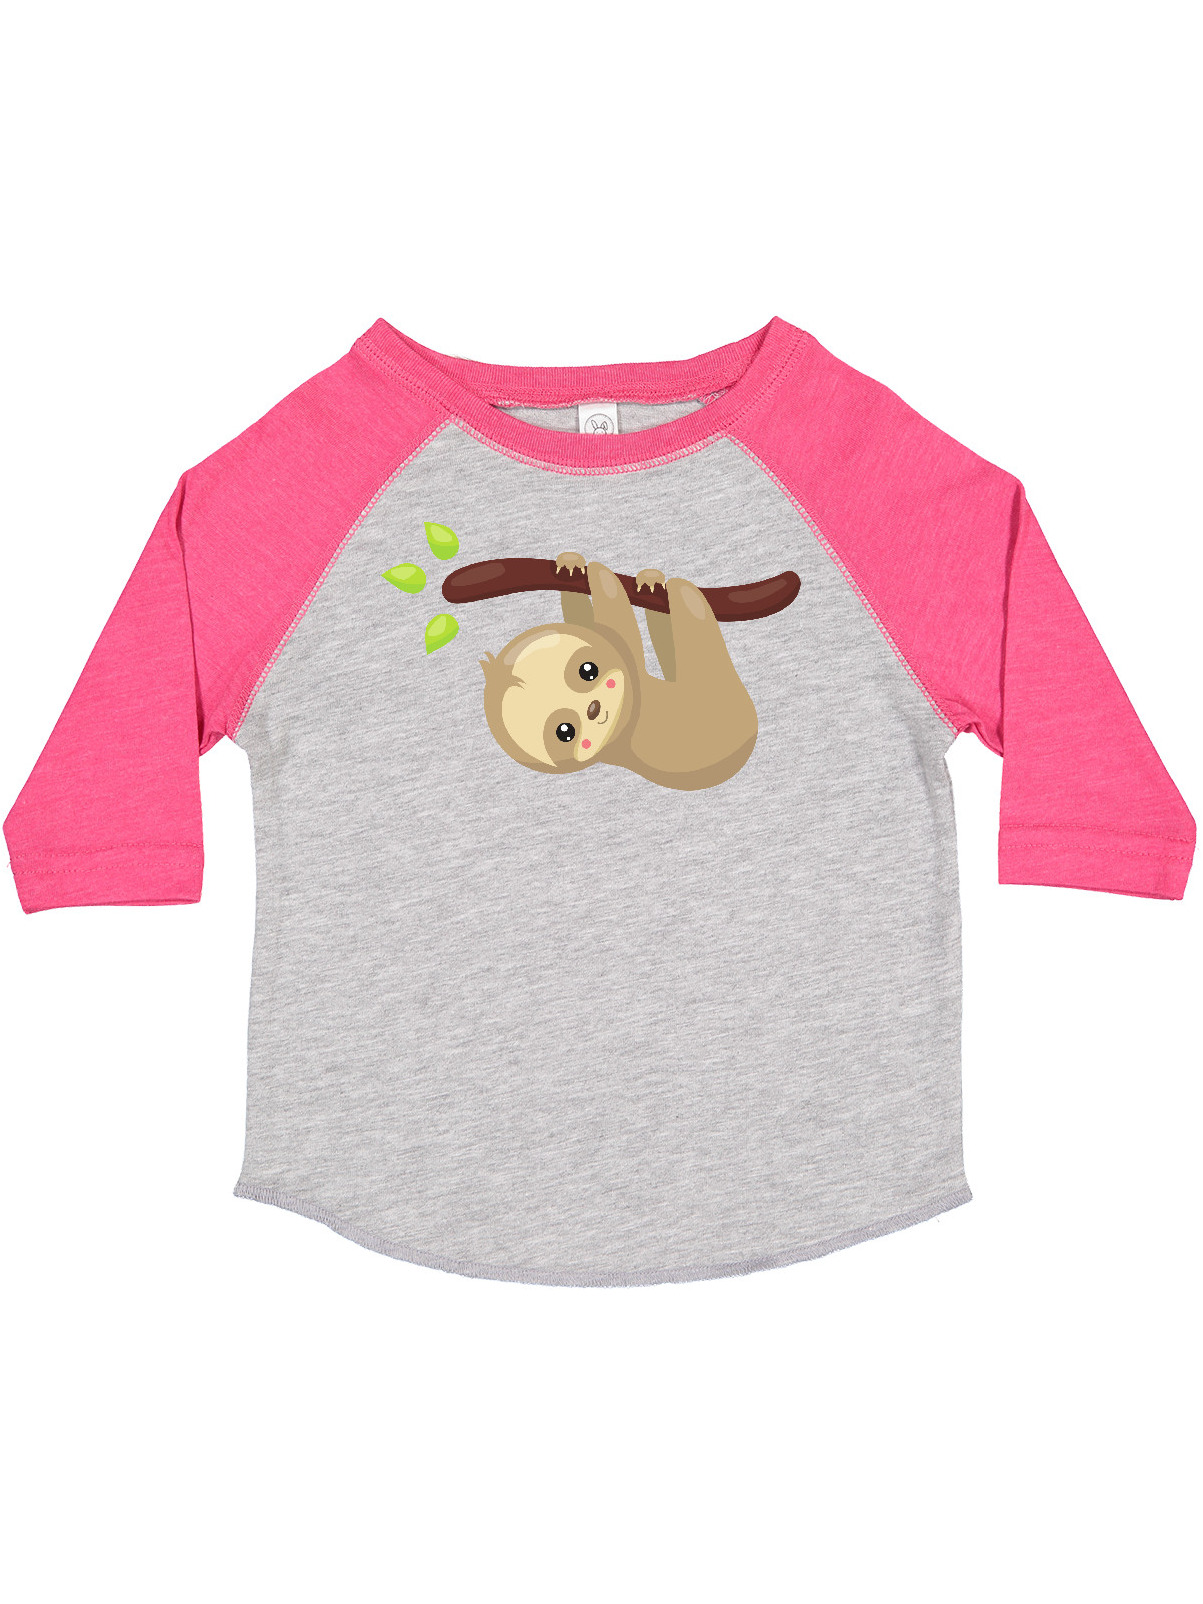 Inktastic Cute Sloth, Little Sloth, Baby Sloth, Lazy Sloth Boys or Girls Toddler T-Shirt - image 1 of 4